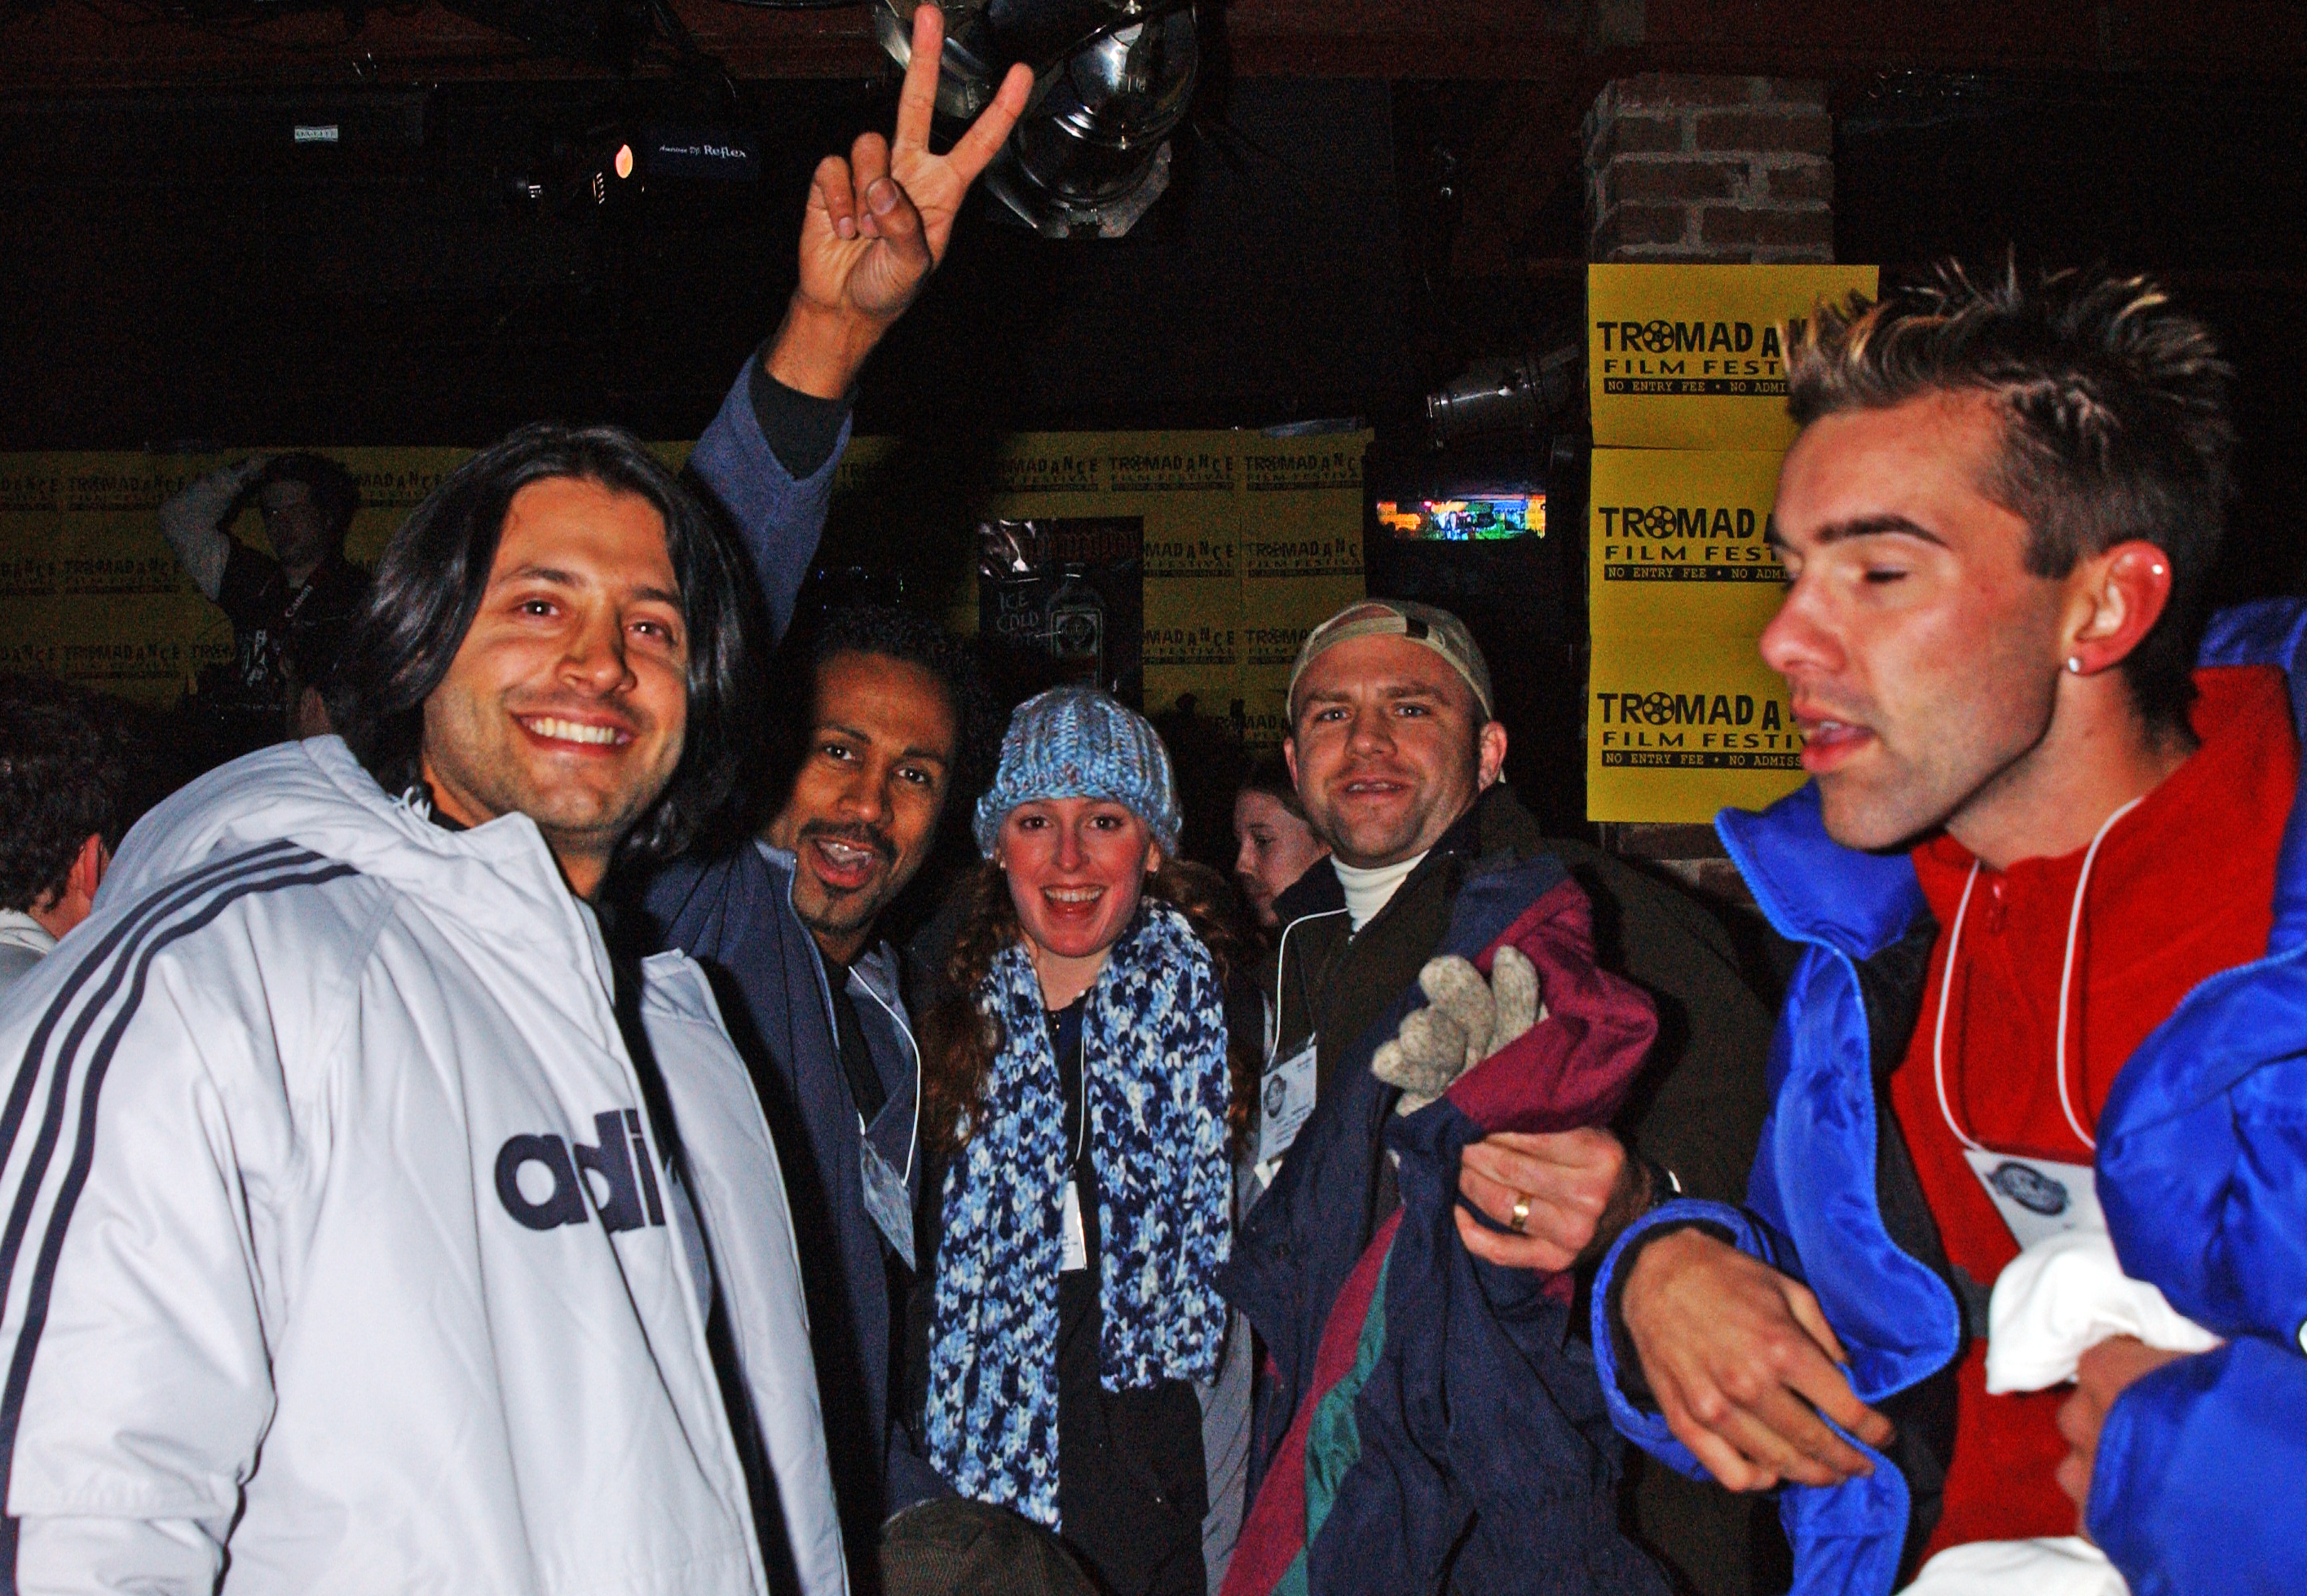 Julian and crew having a blast at Sundance while filming doc. 'Journey to Sundance'.